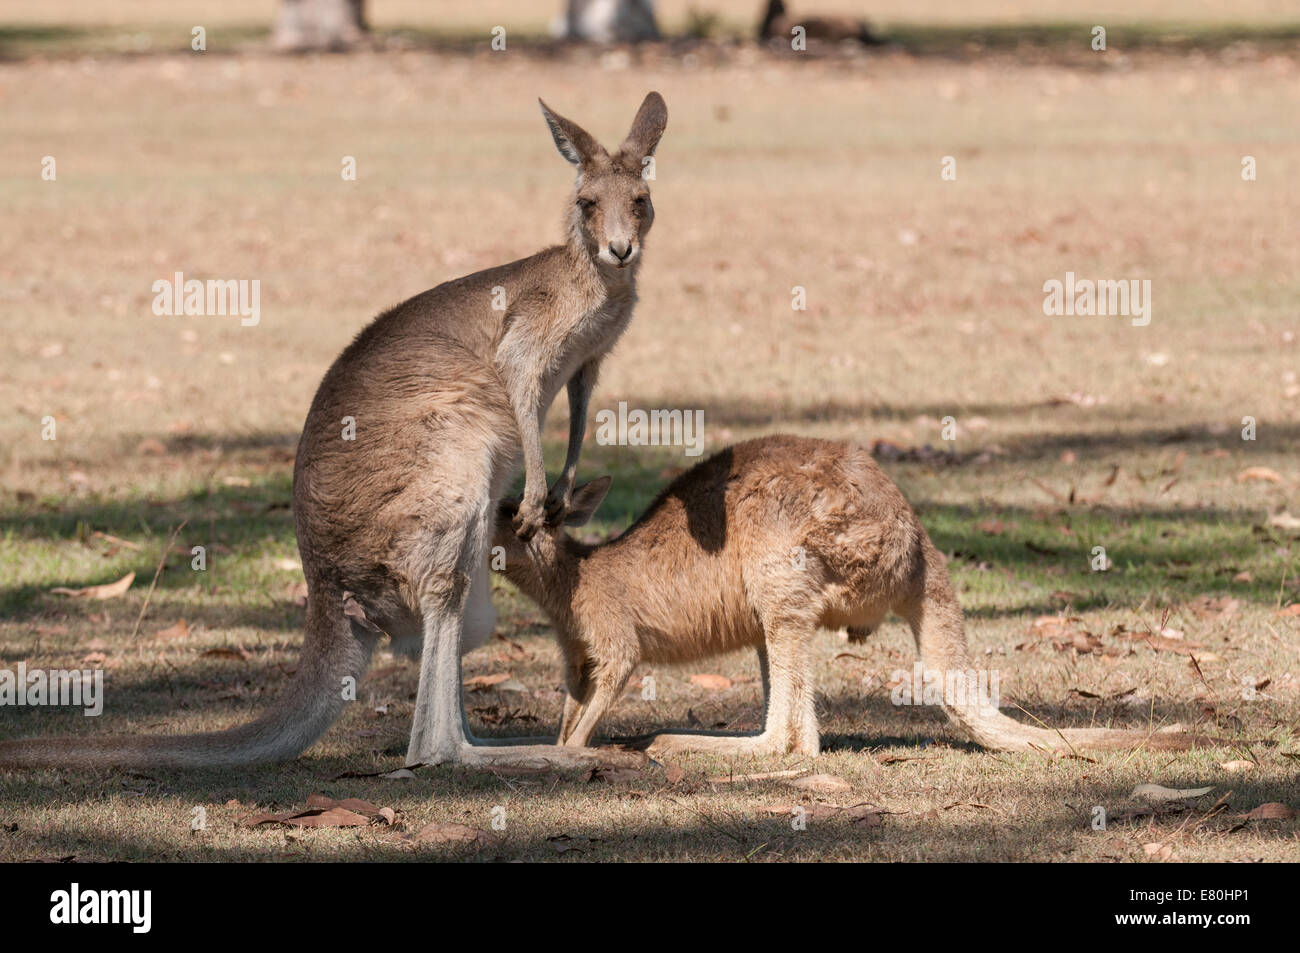 Stock photo of a yearling eastern grey kangaroo trying to crawl into a pouch. Stock Photo